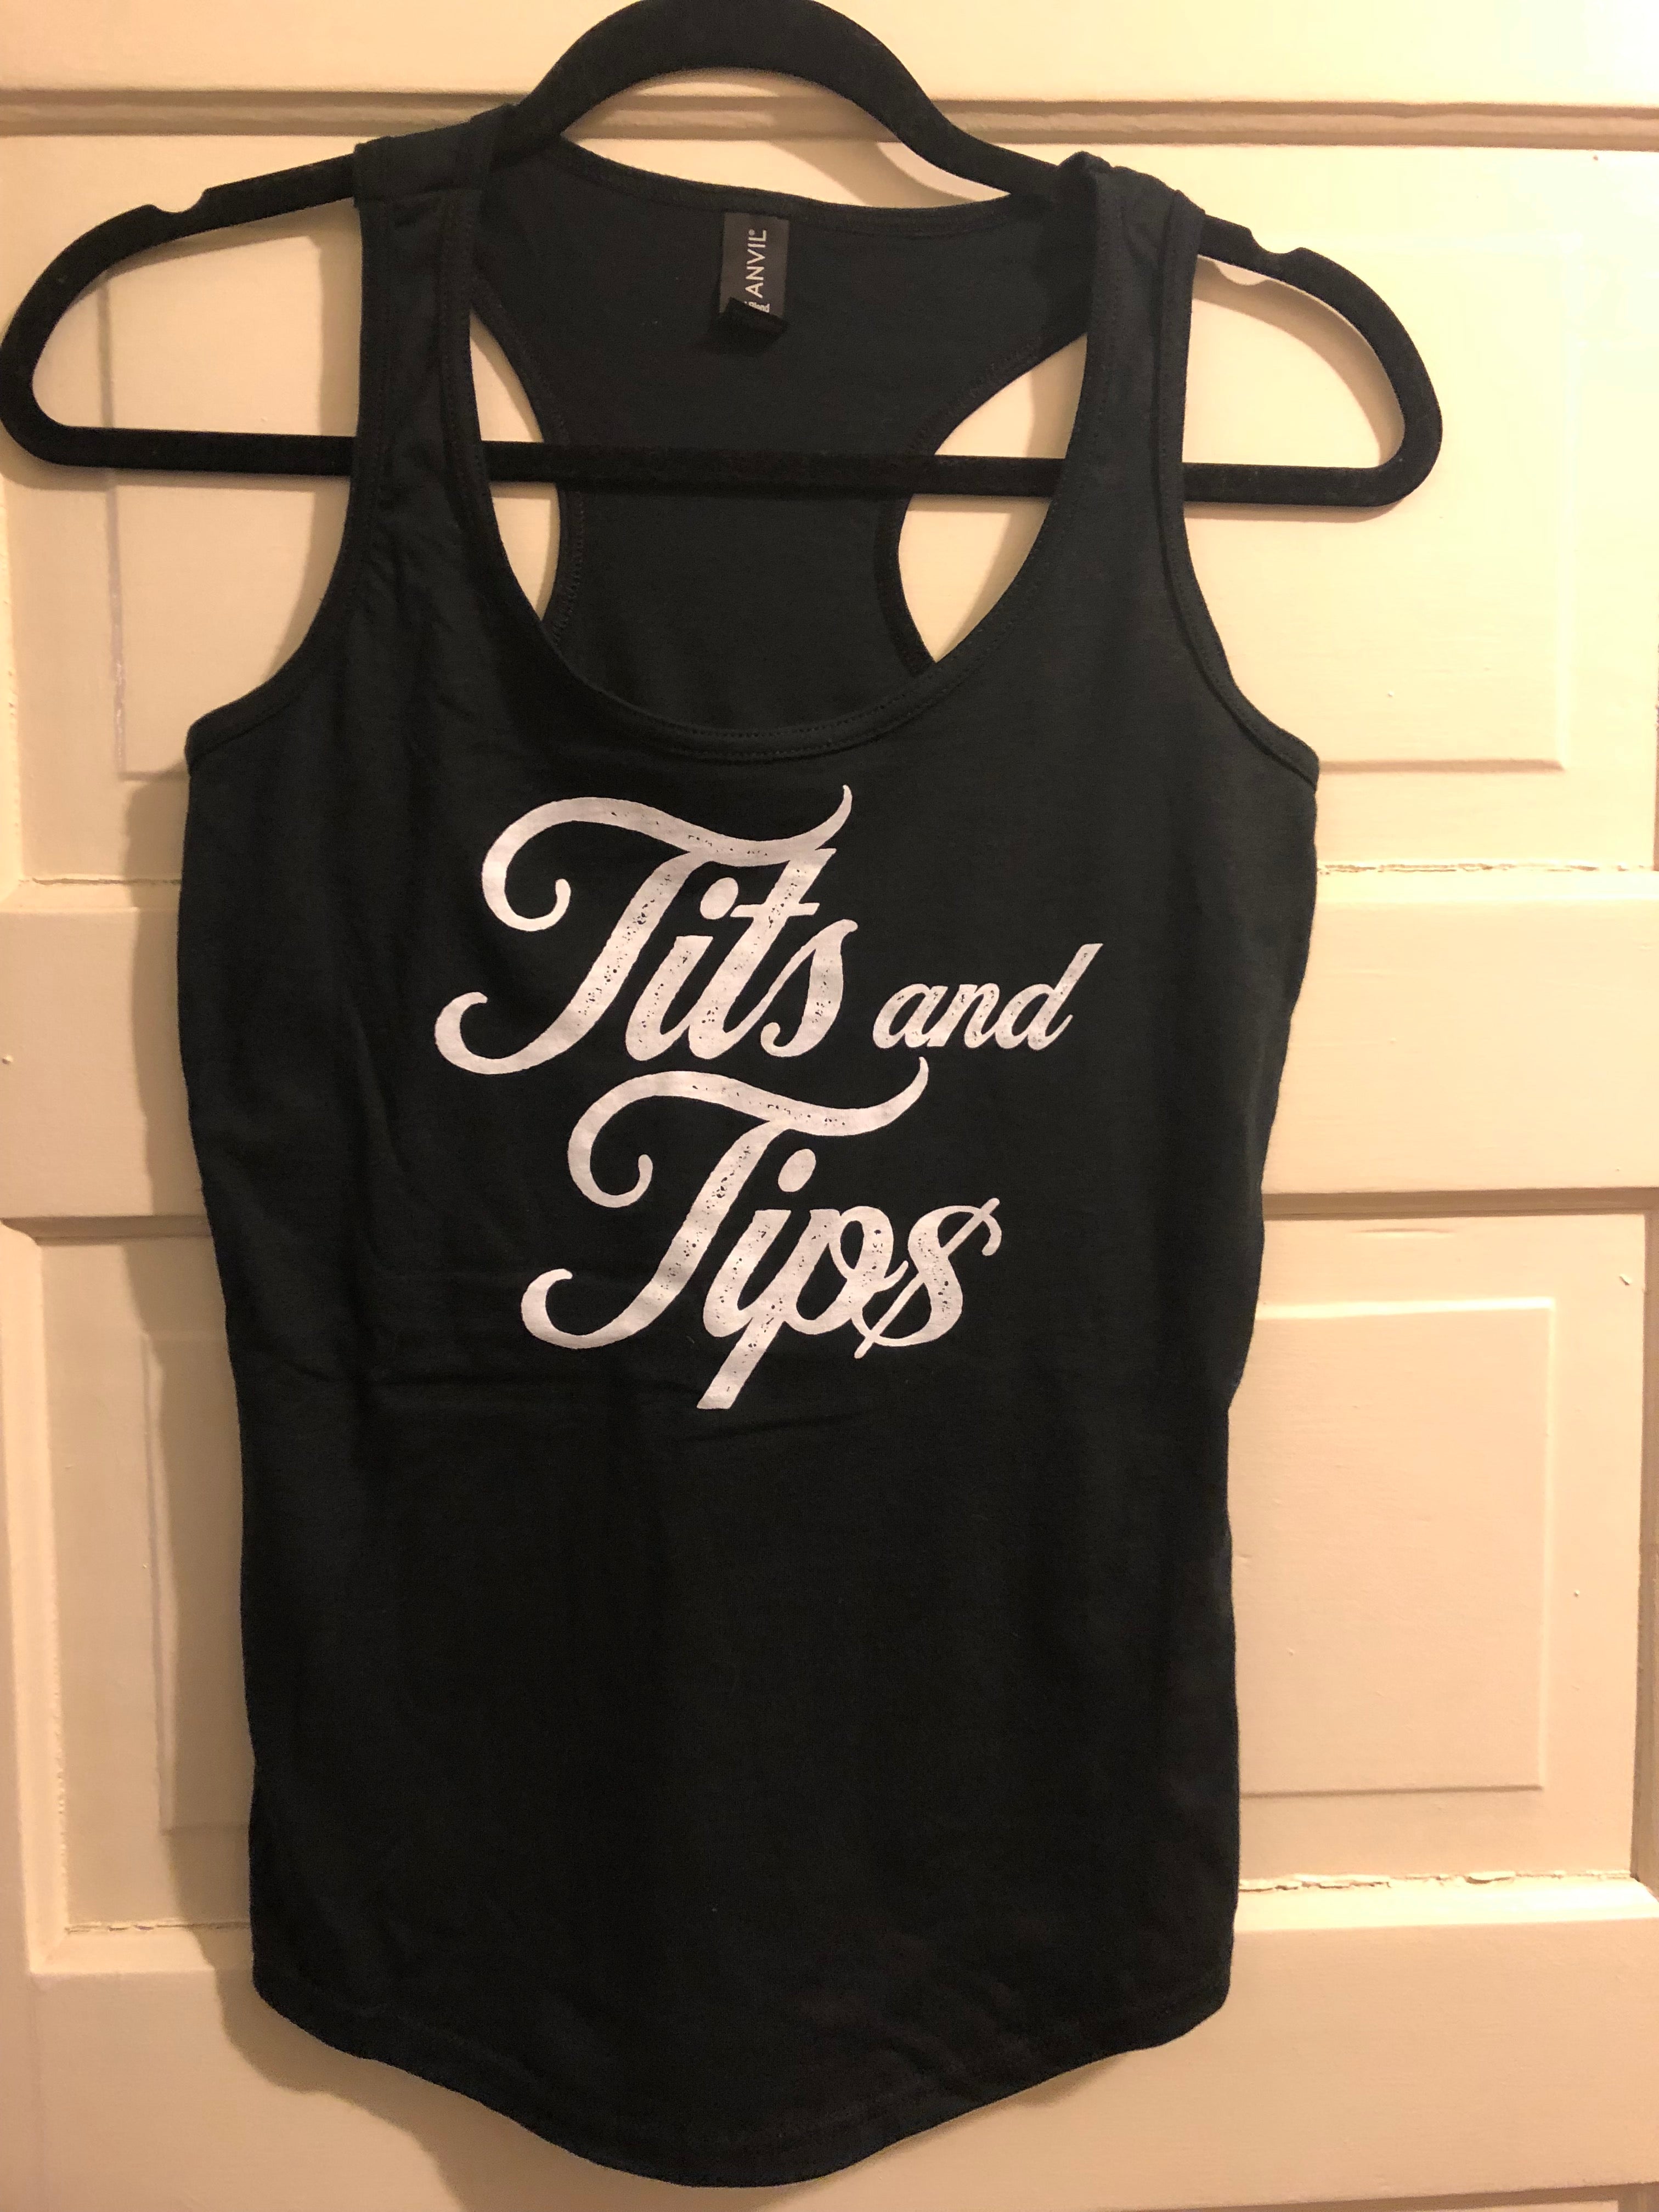 All Tits and Tips ON SALE